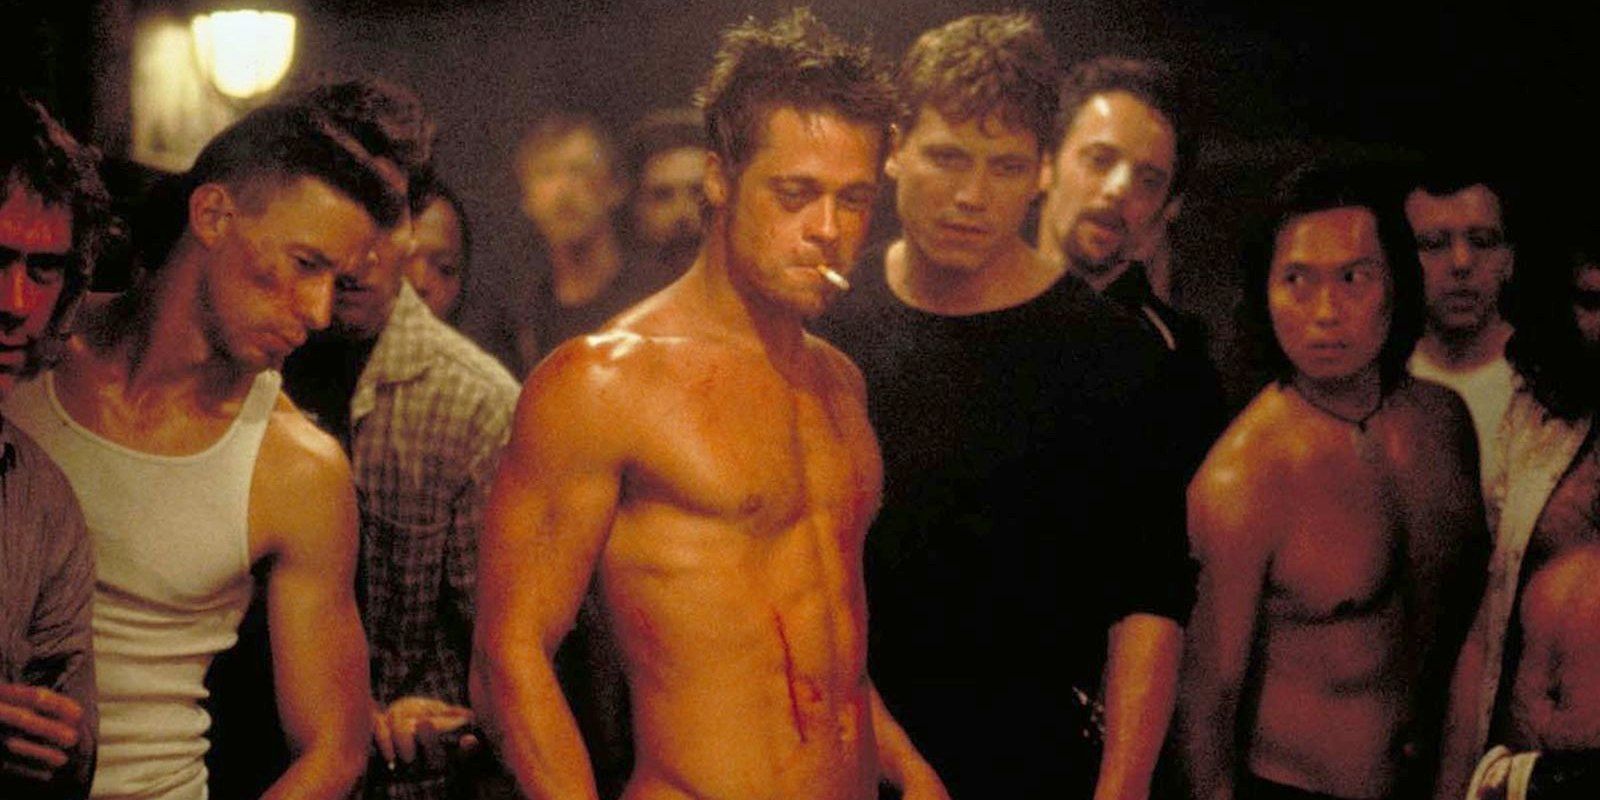 Tyler standing in the middle of a group of men in Fight Club.